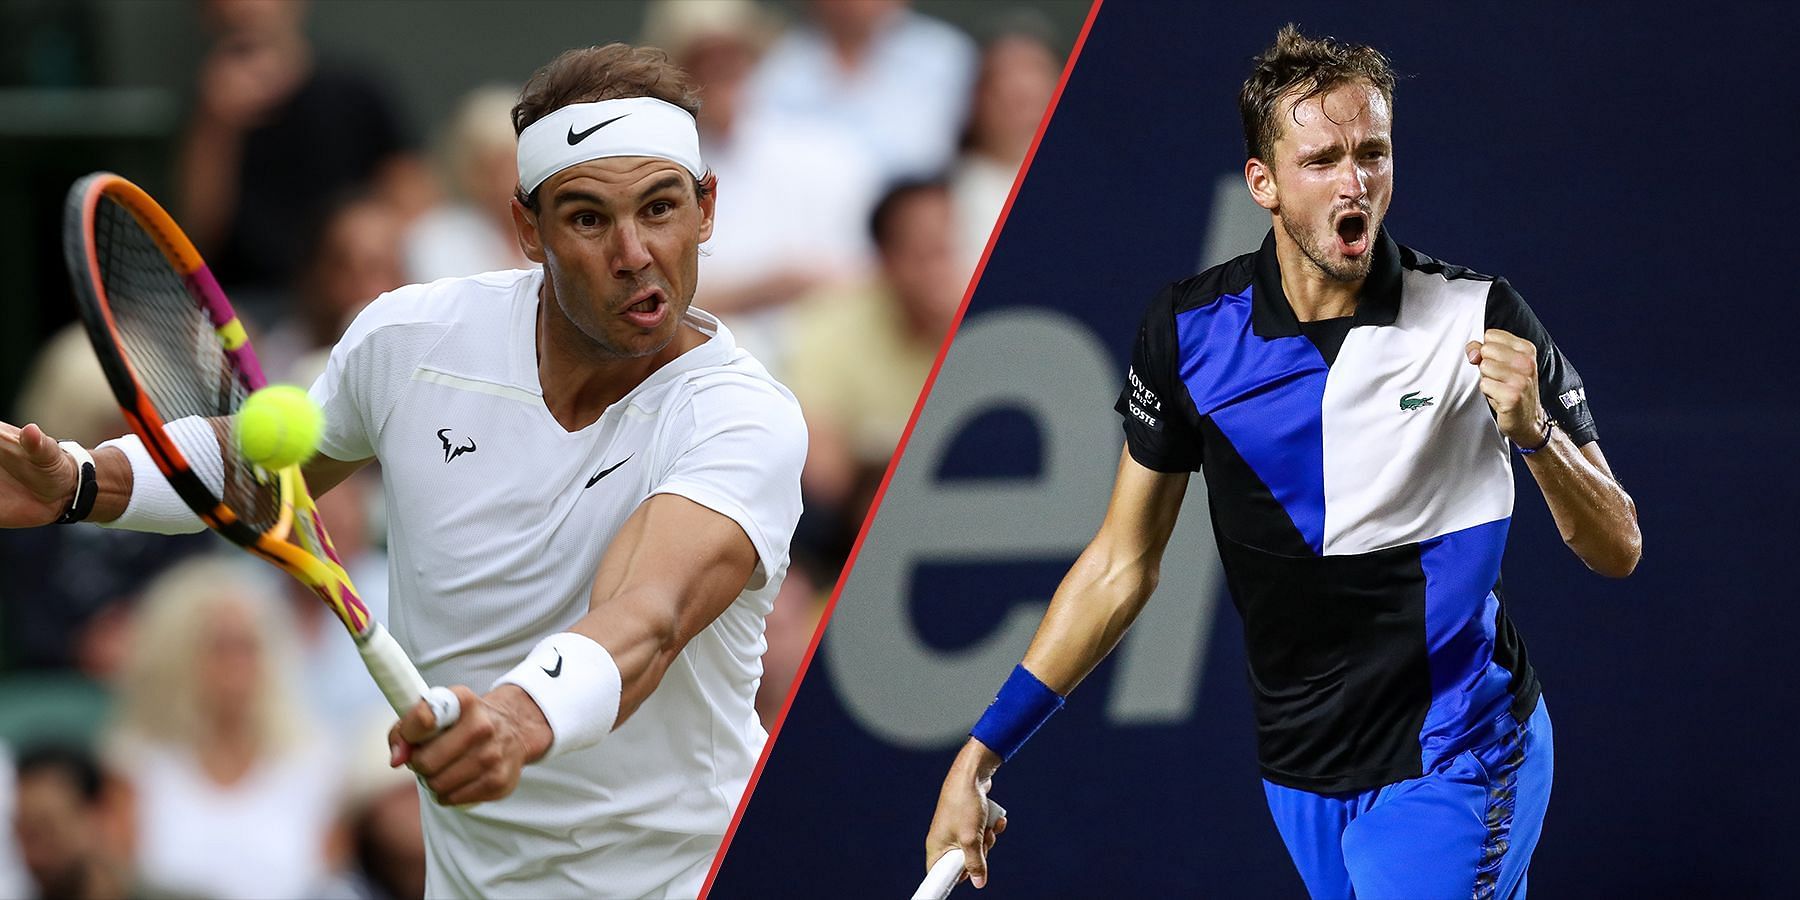 Rafael Nadal and Daniil Medvedev are among the favorites to win the Western &amp; Southern Open in